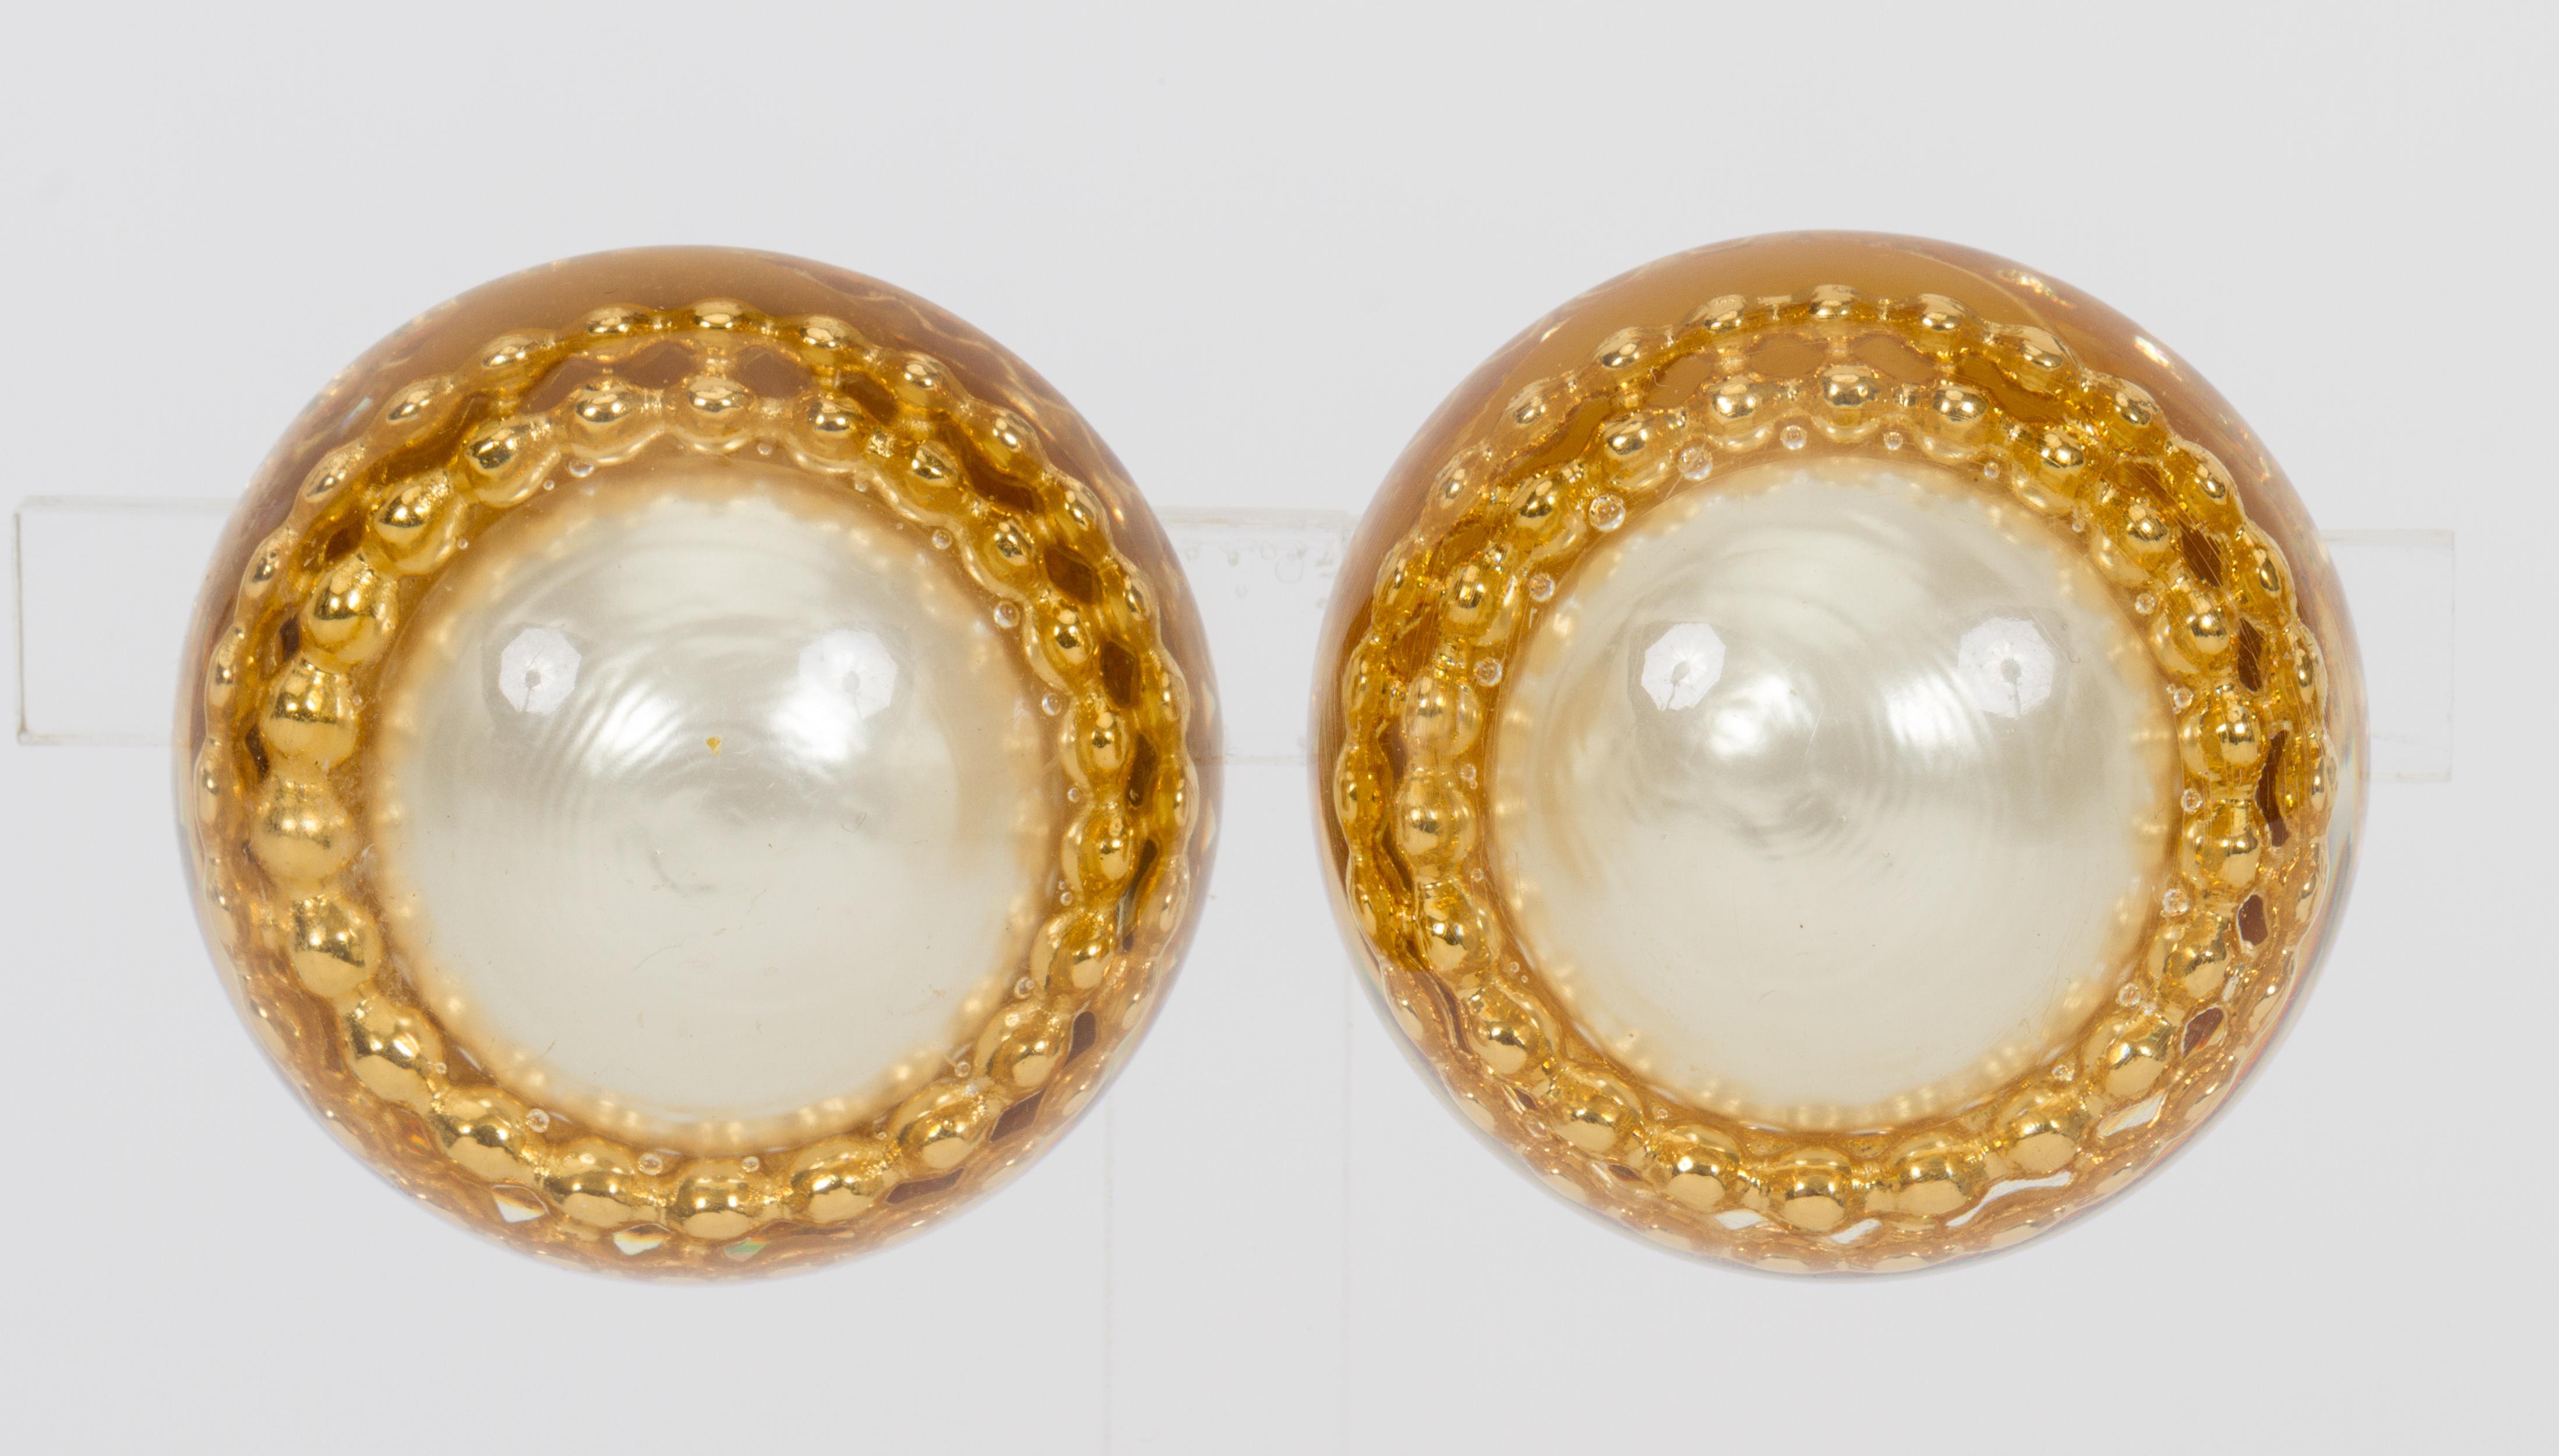 1970s Chanel oversize Lucite and faux-pearl inlay earrings. Clip backs. Comes with original pouch or box.